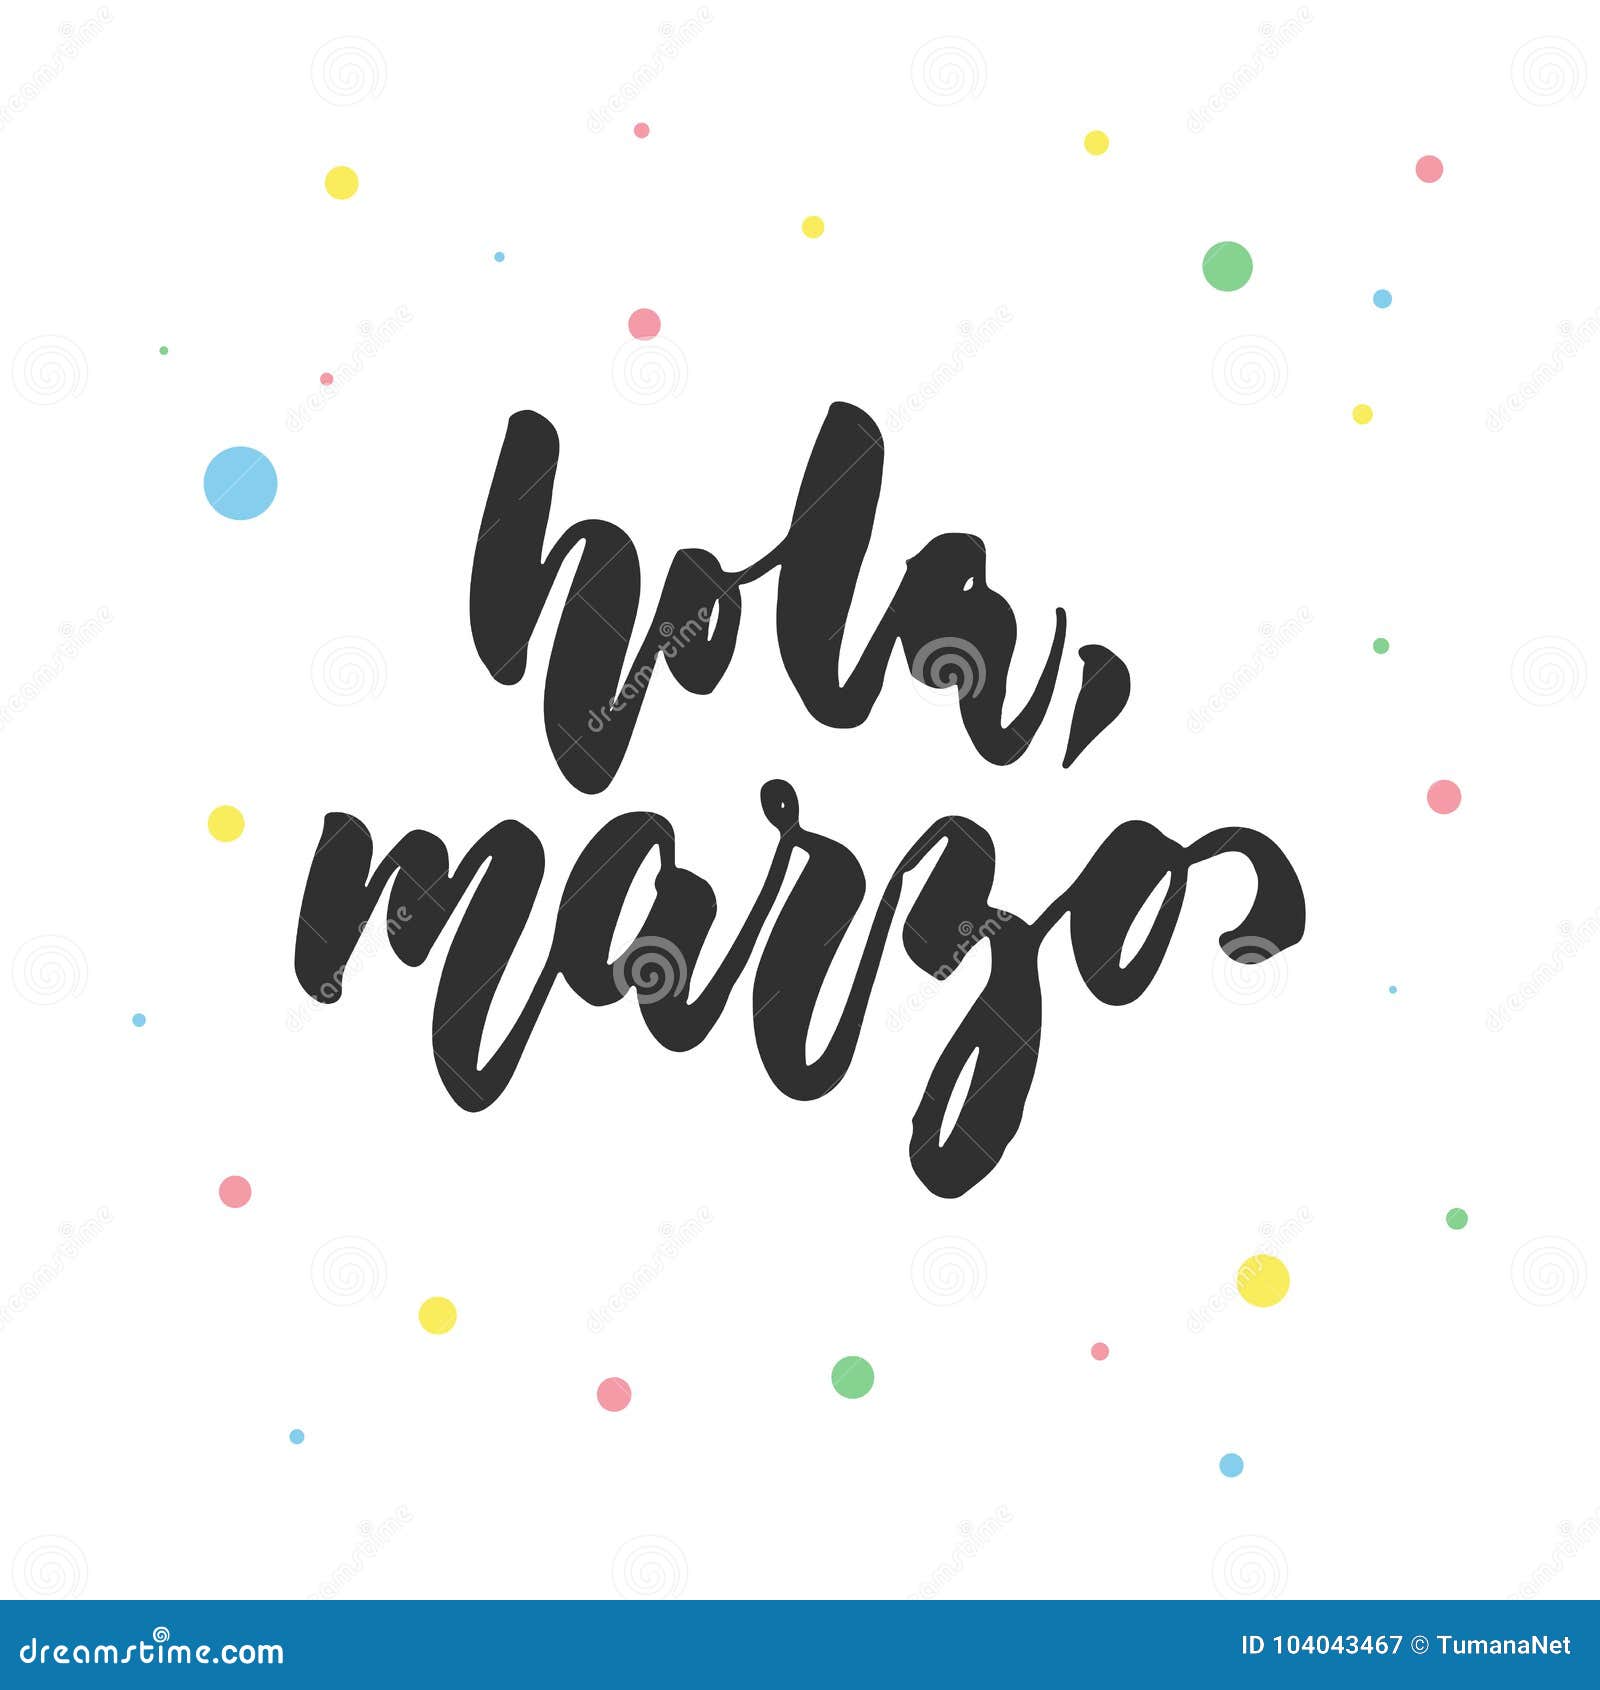 hola, marzo - hello, march in spanish, hand drawn latin lettering quote with colorful circles  on the white